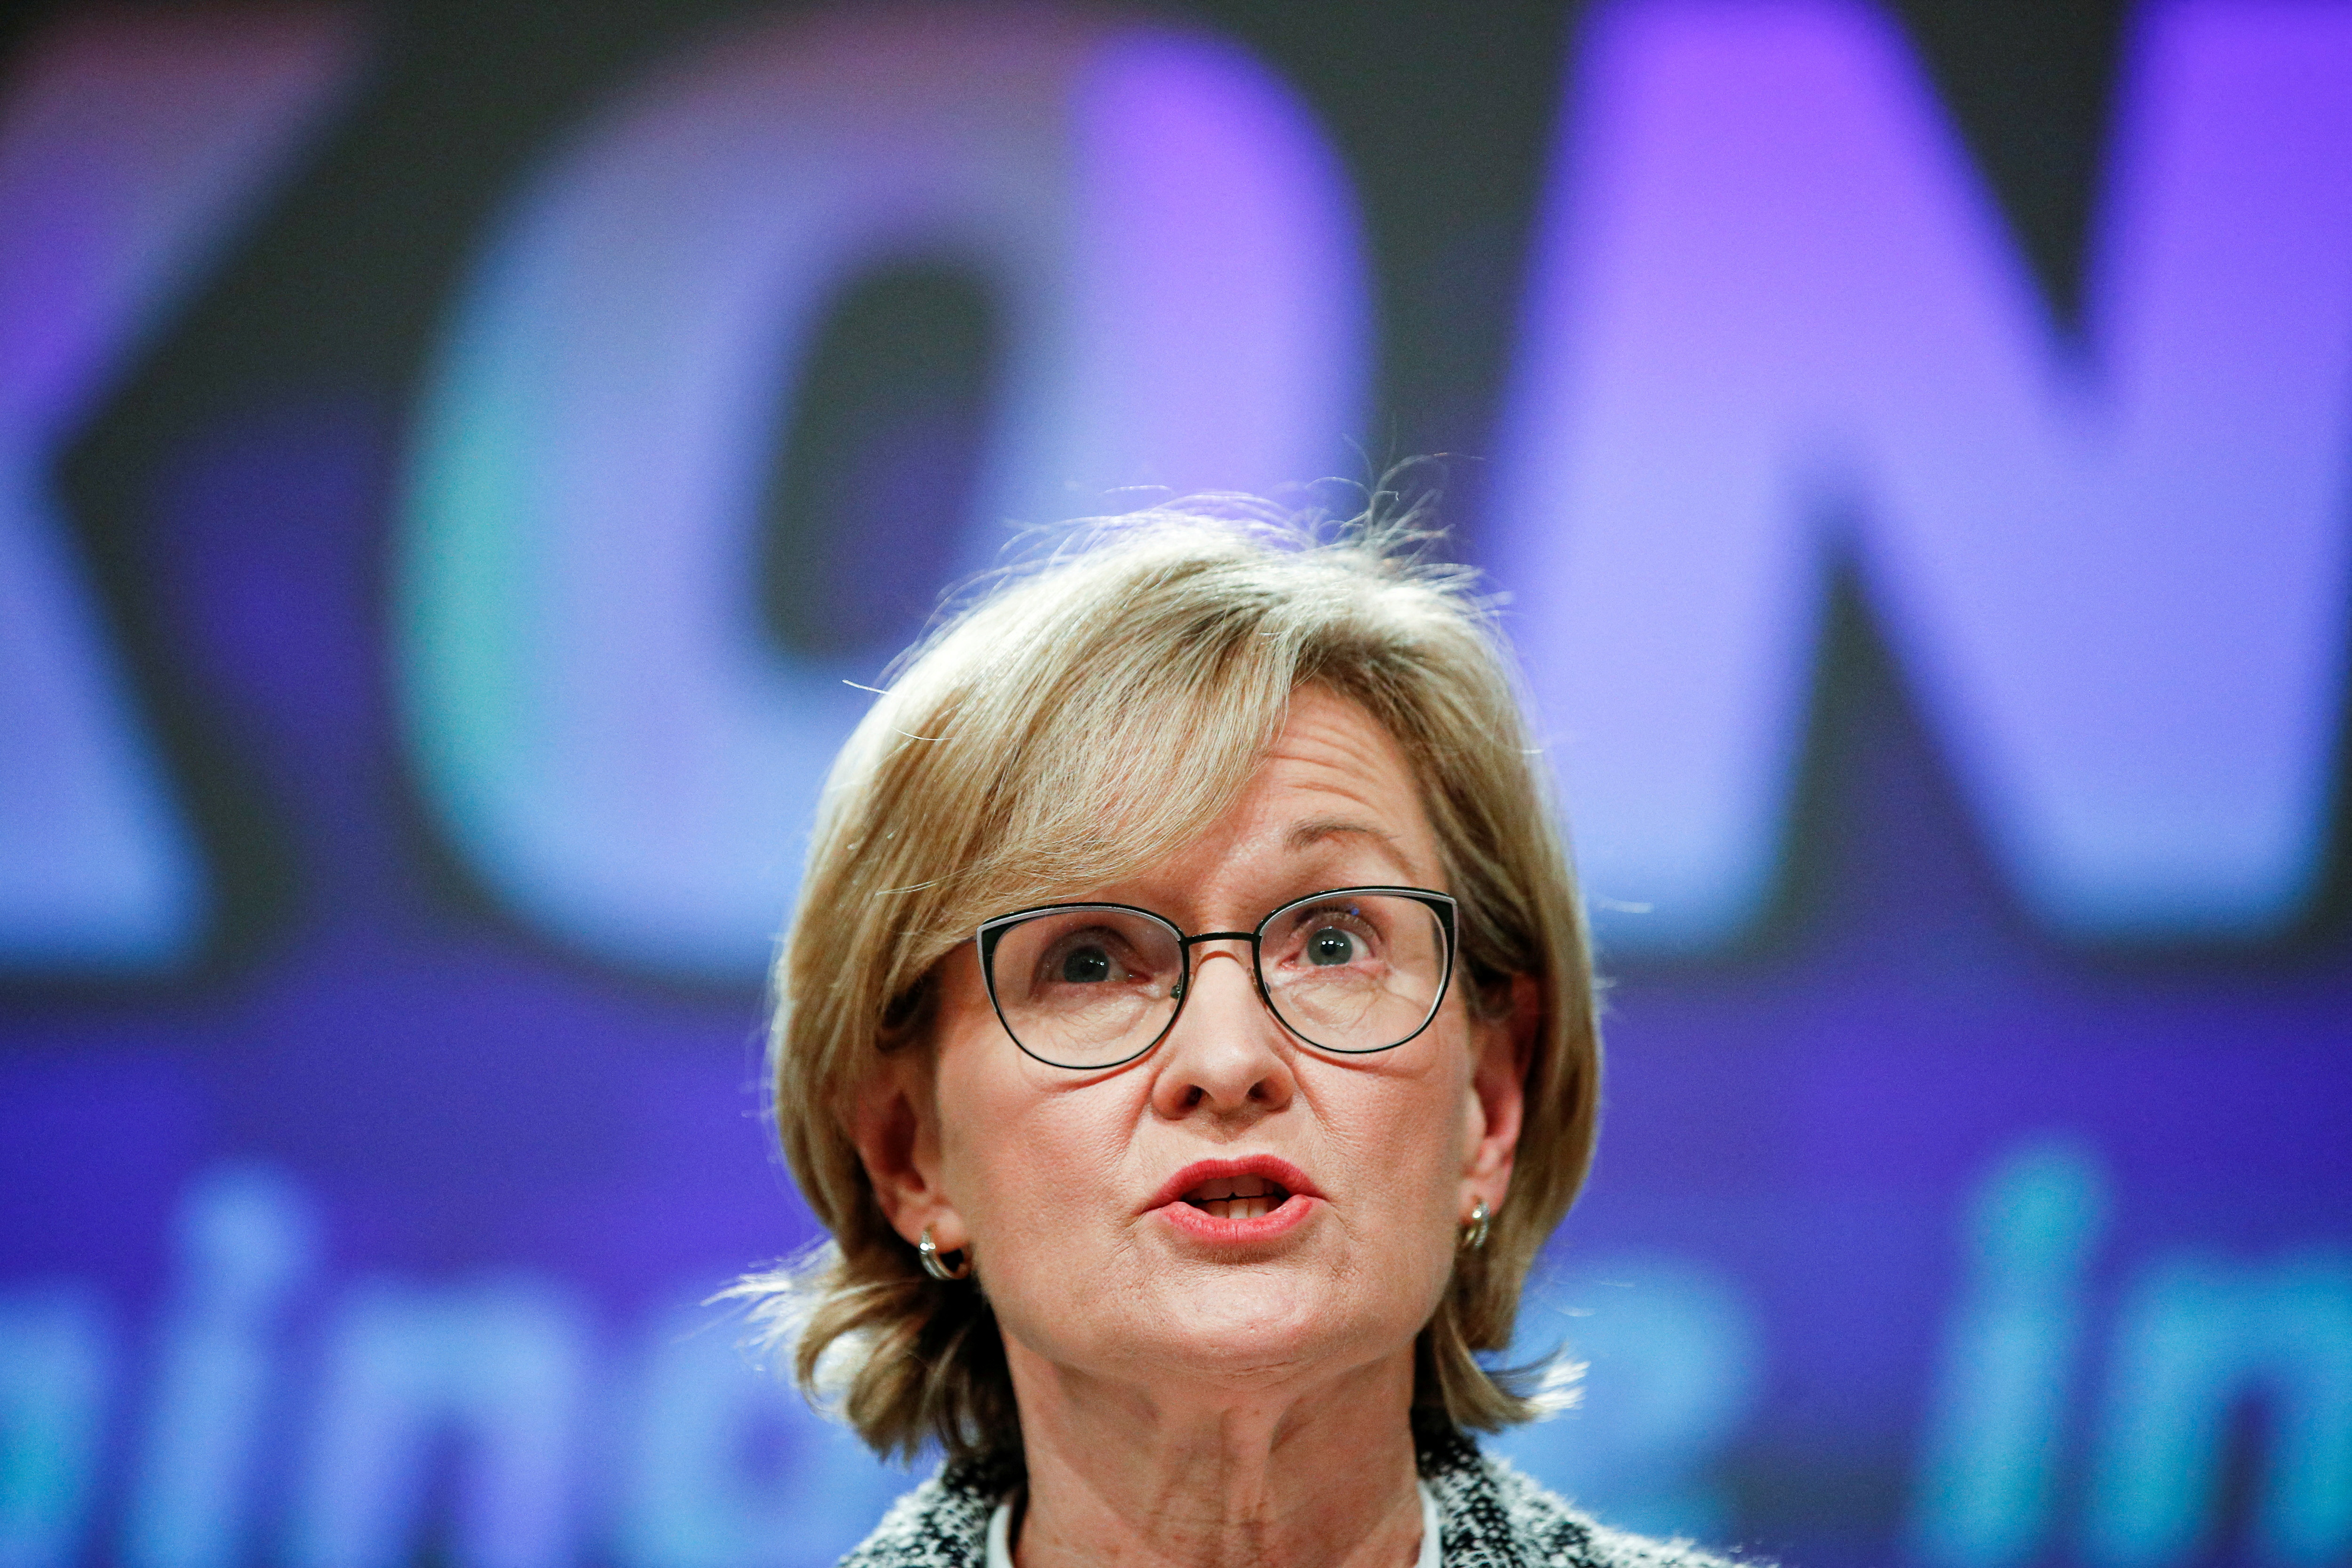 European Commissioner Mairead McGuinness holds a news conference in Brussels